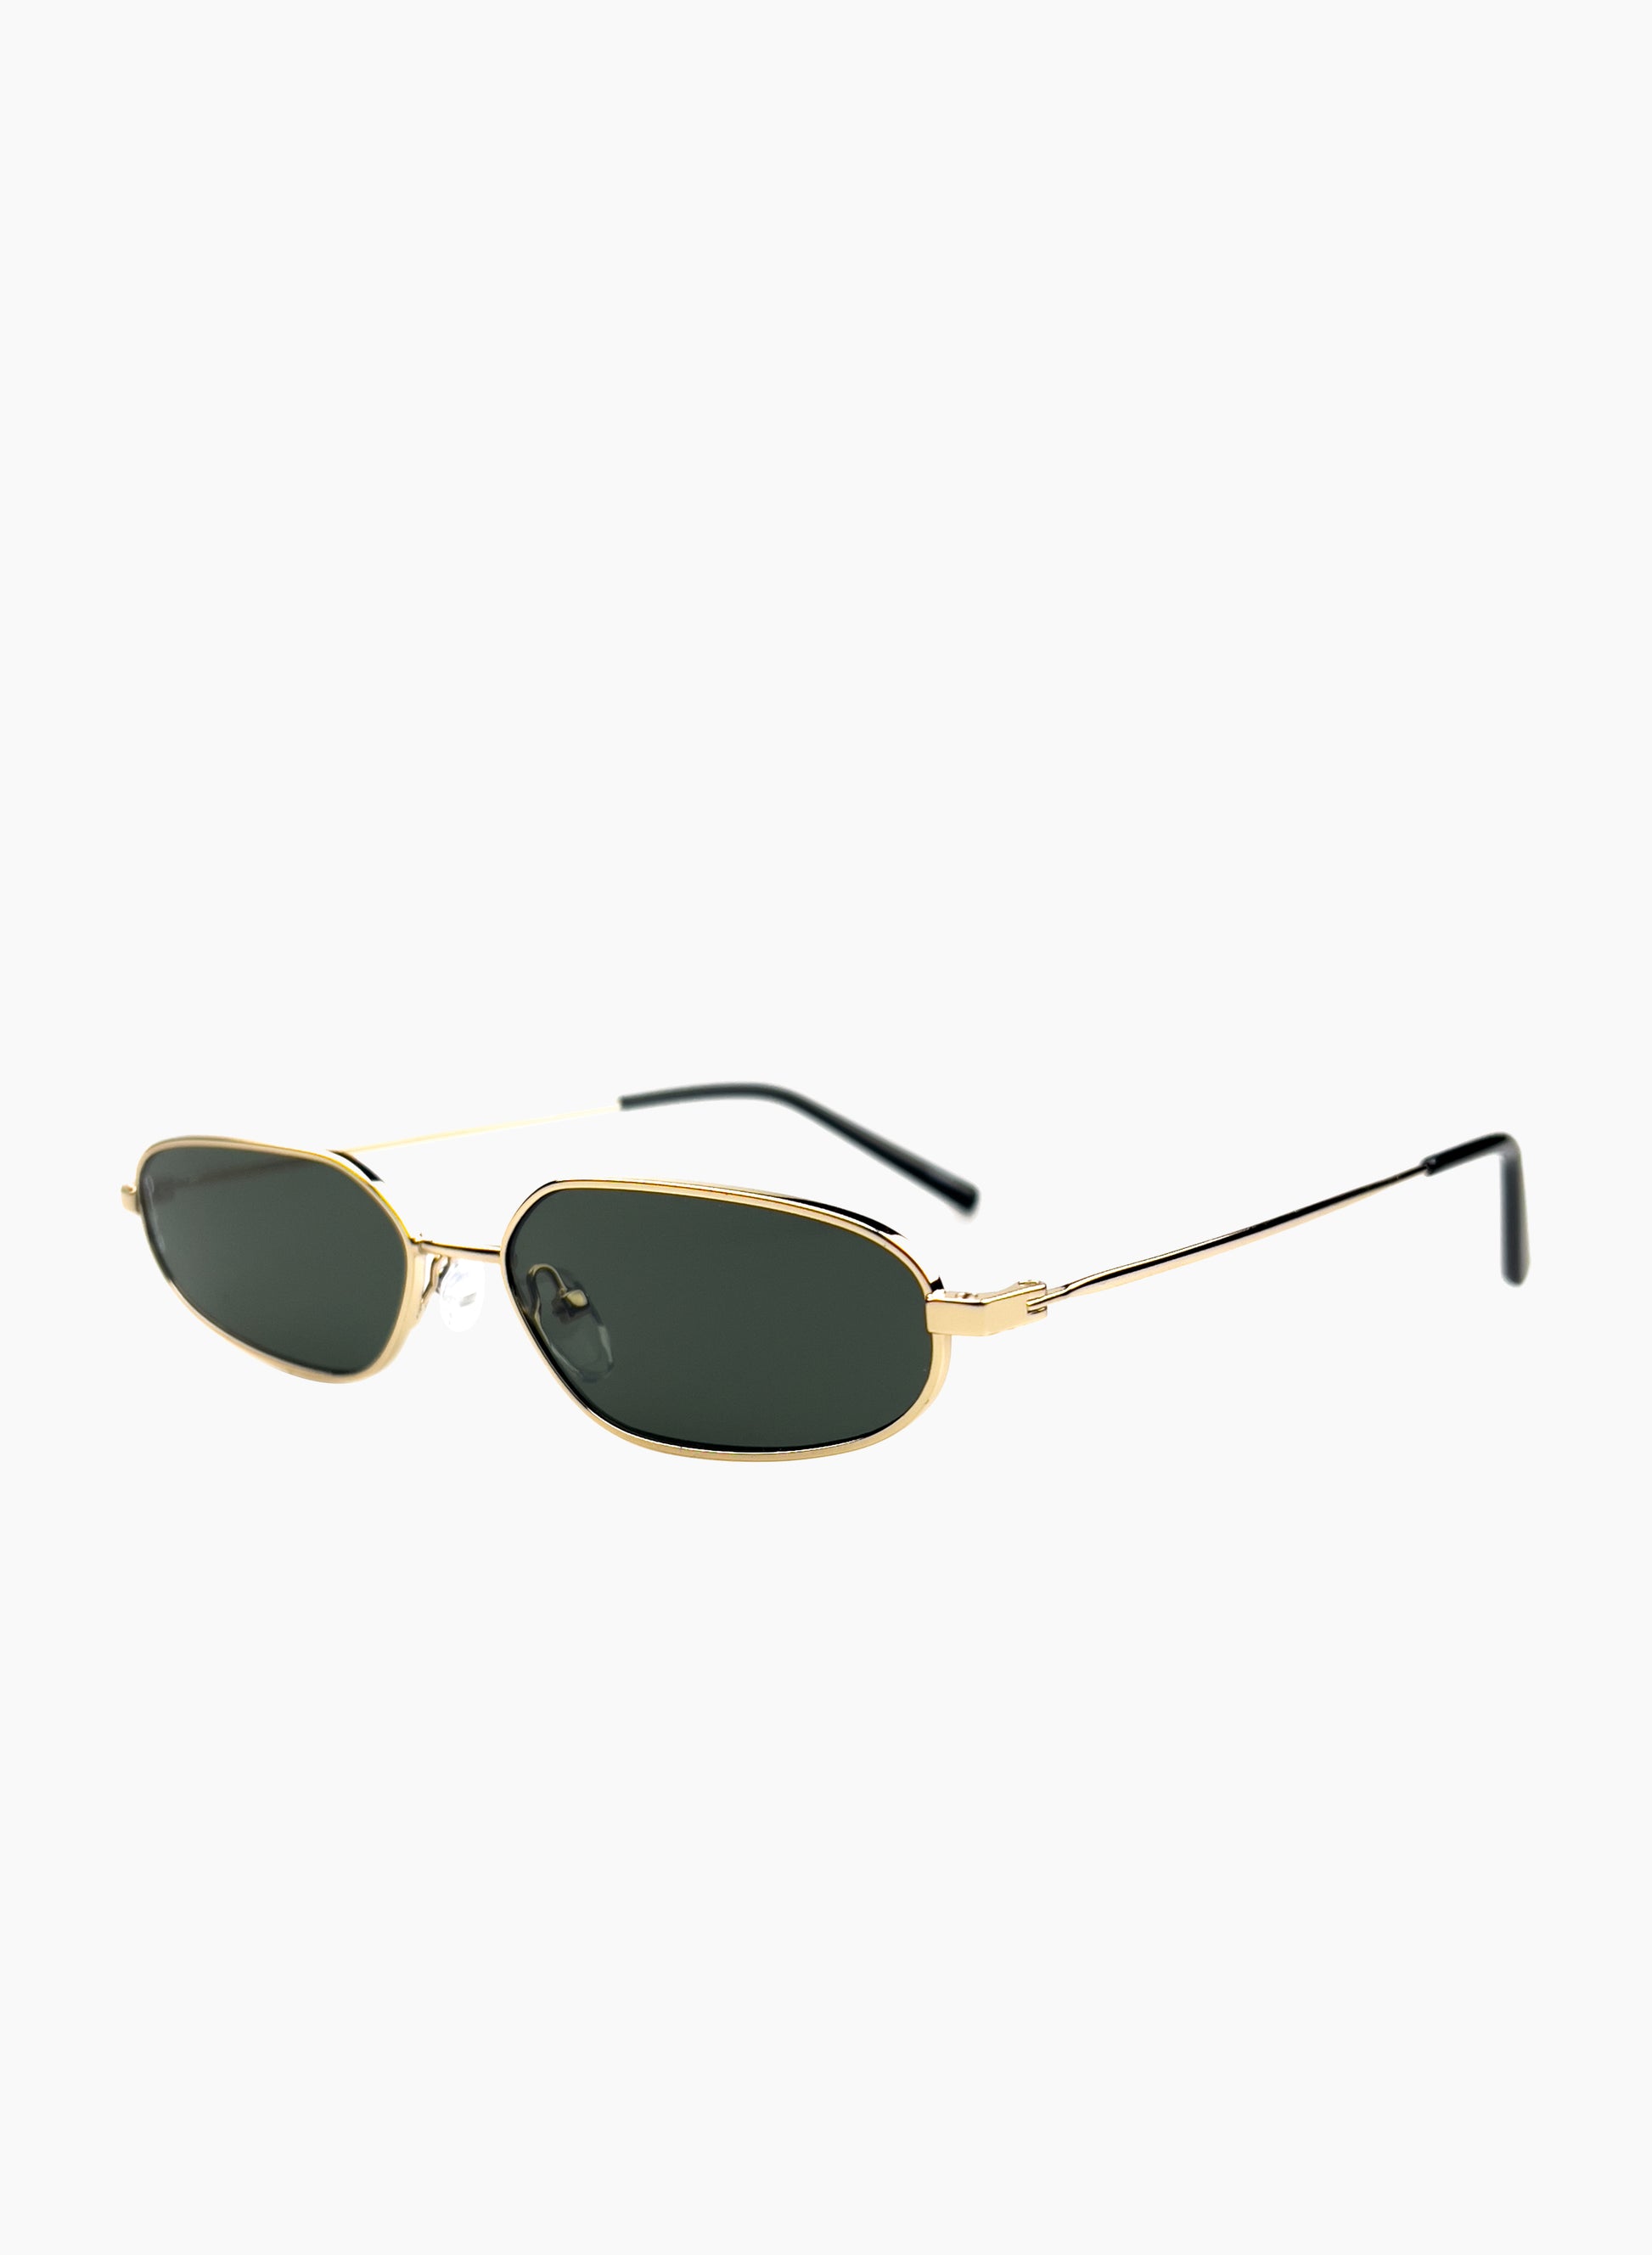 Side view Drew metal sunglasses with gold metal frame and green lenses